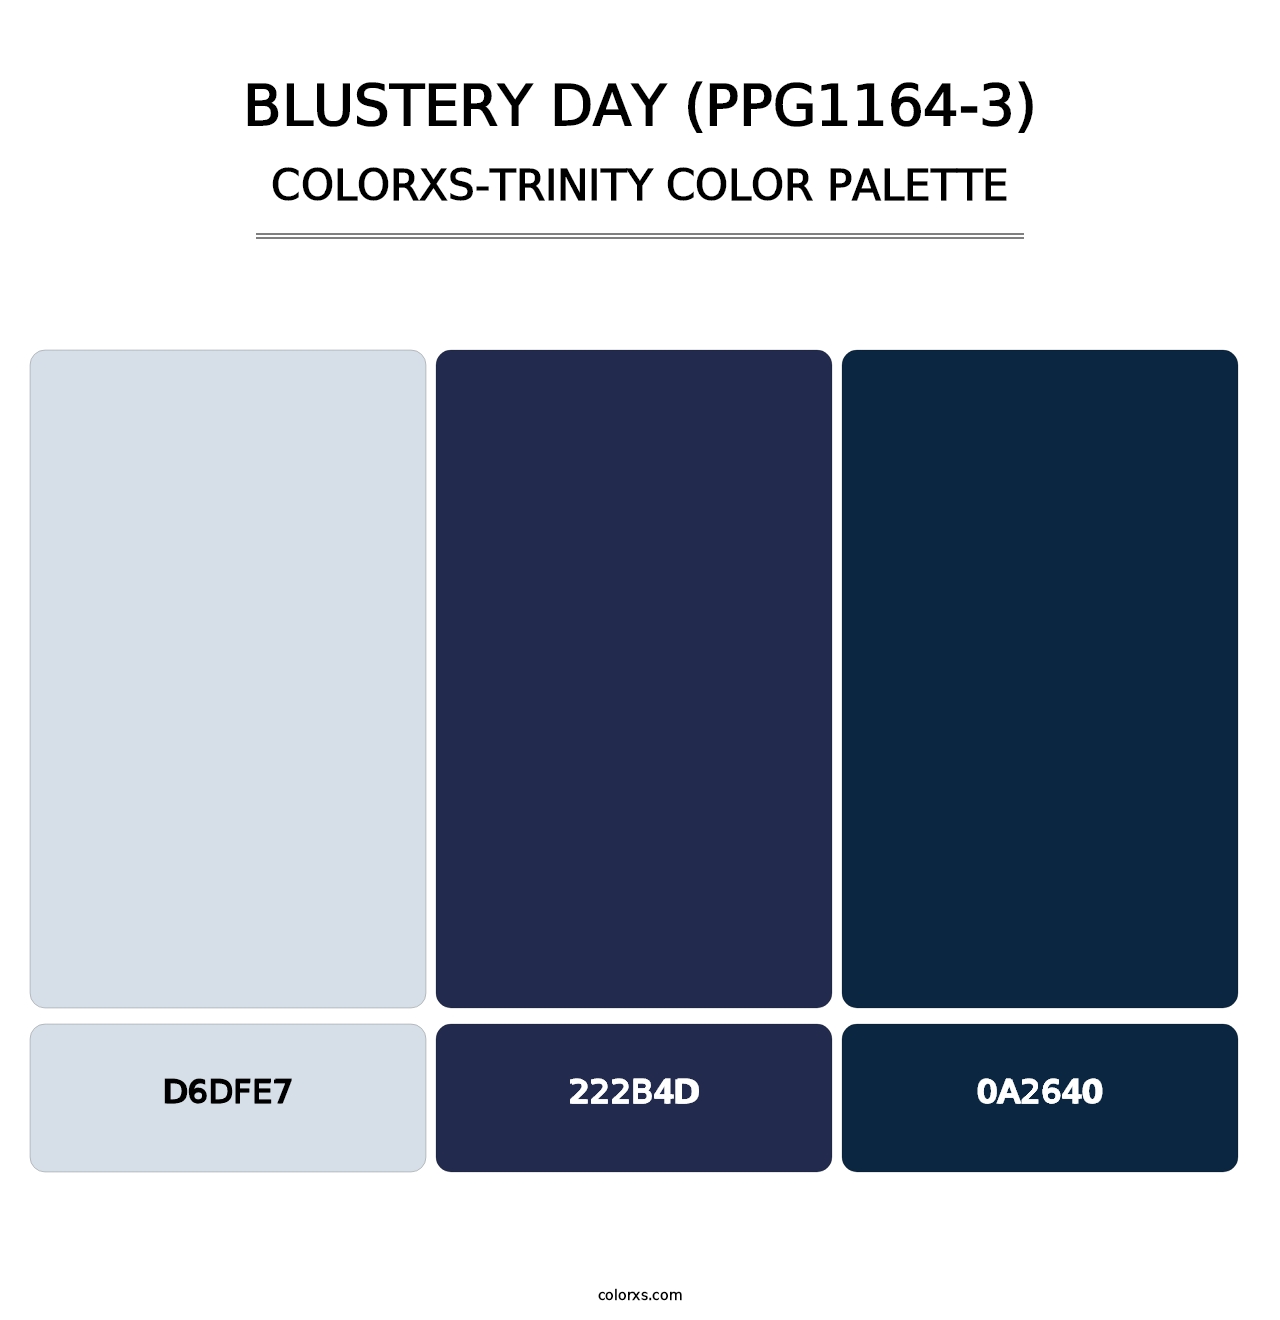 Blustery Day (PPG1164-3) - Colorxs Trinity Palette